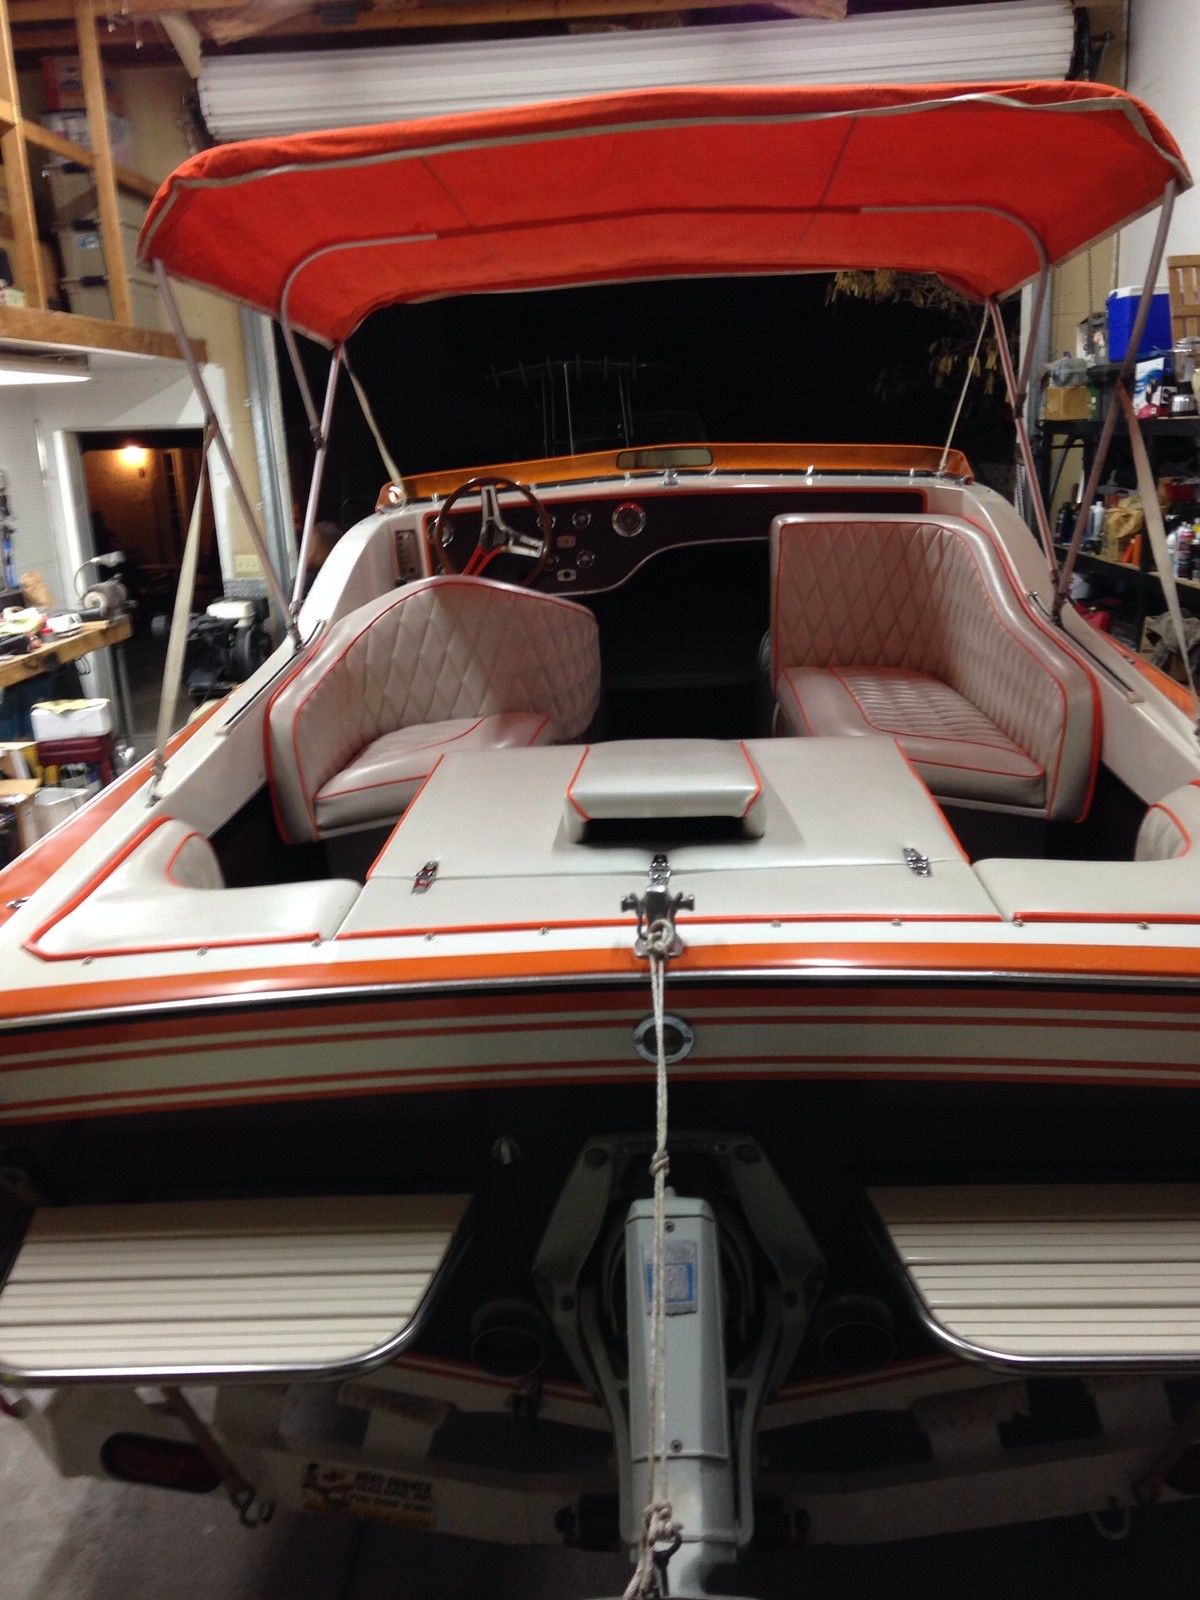 Sleek Craft Day Cruiser 1979 for sale for $3,000 - Boats ...